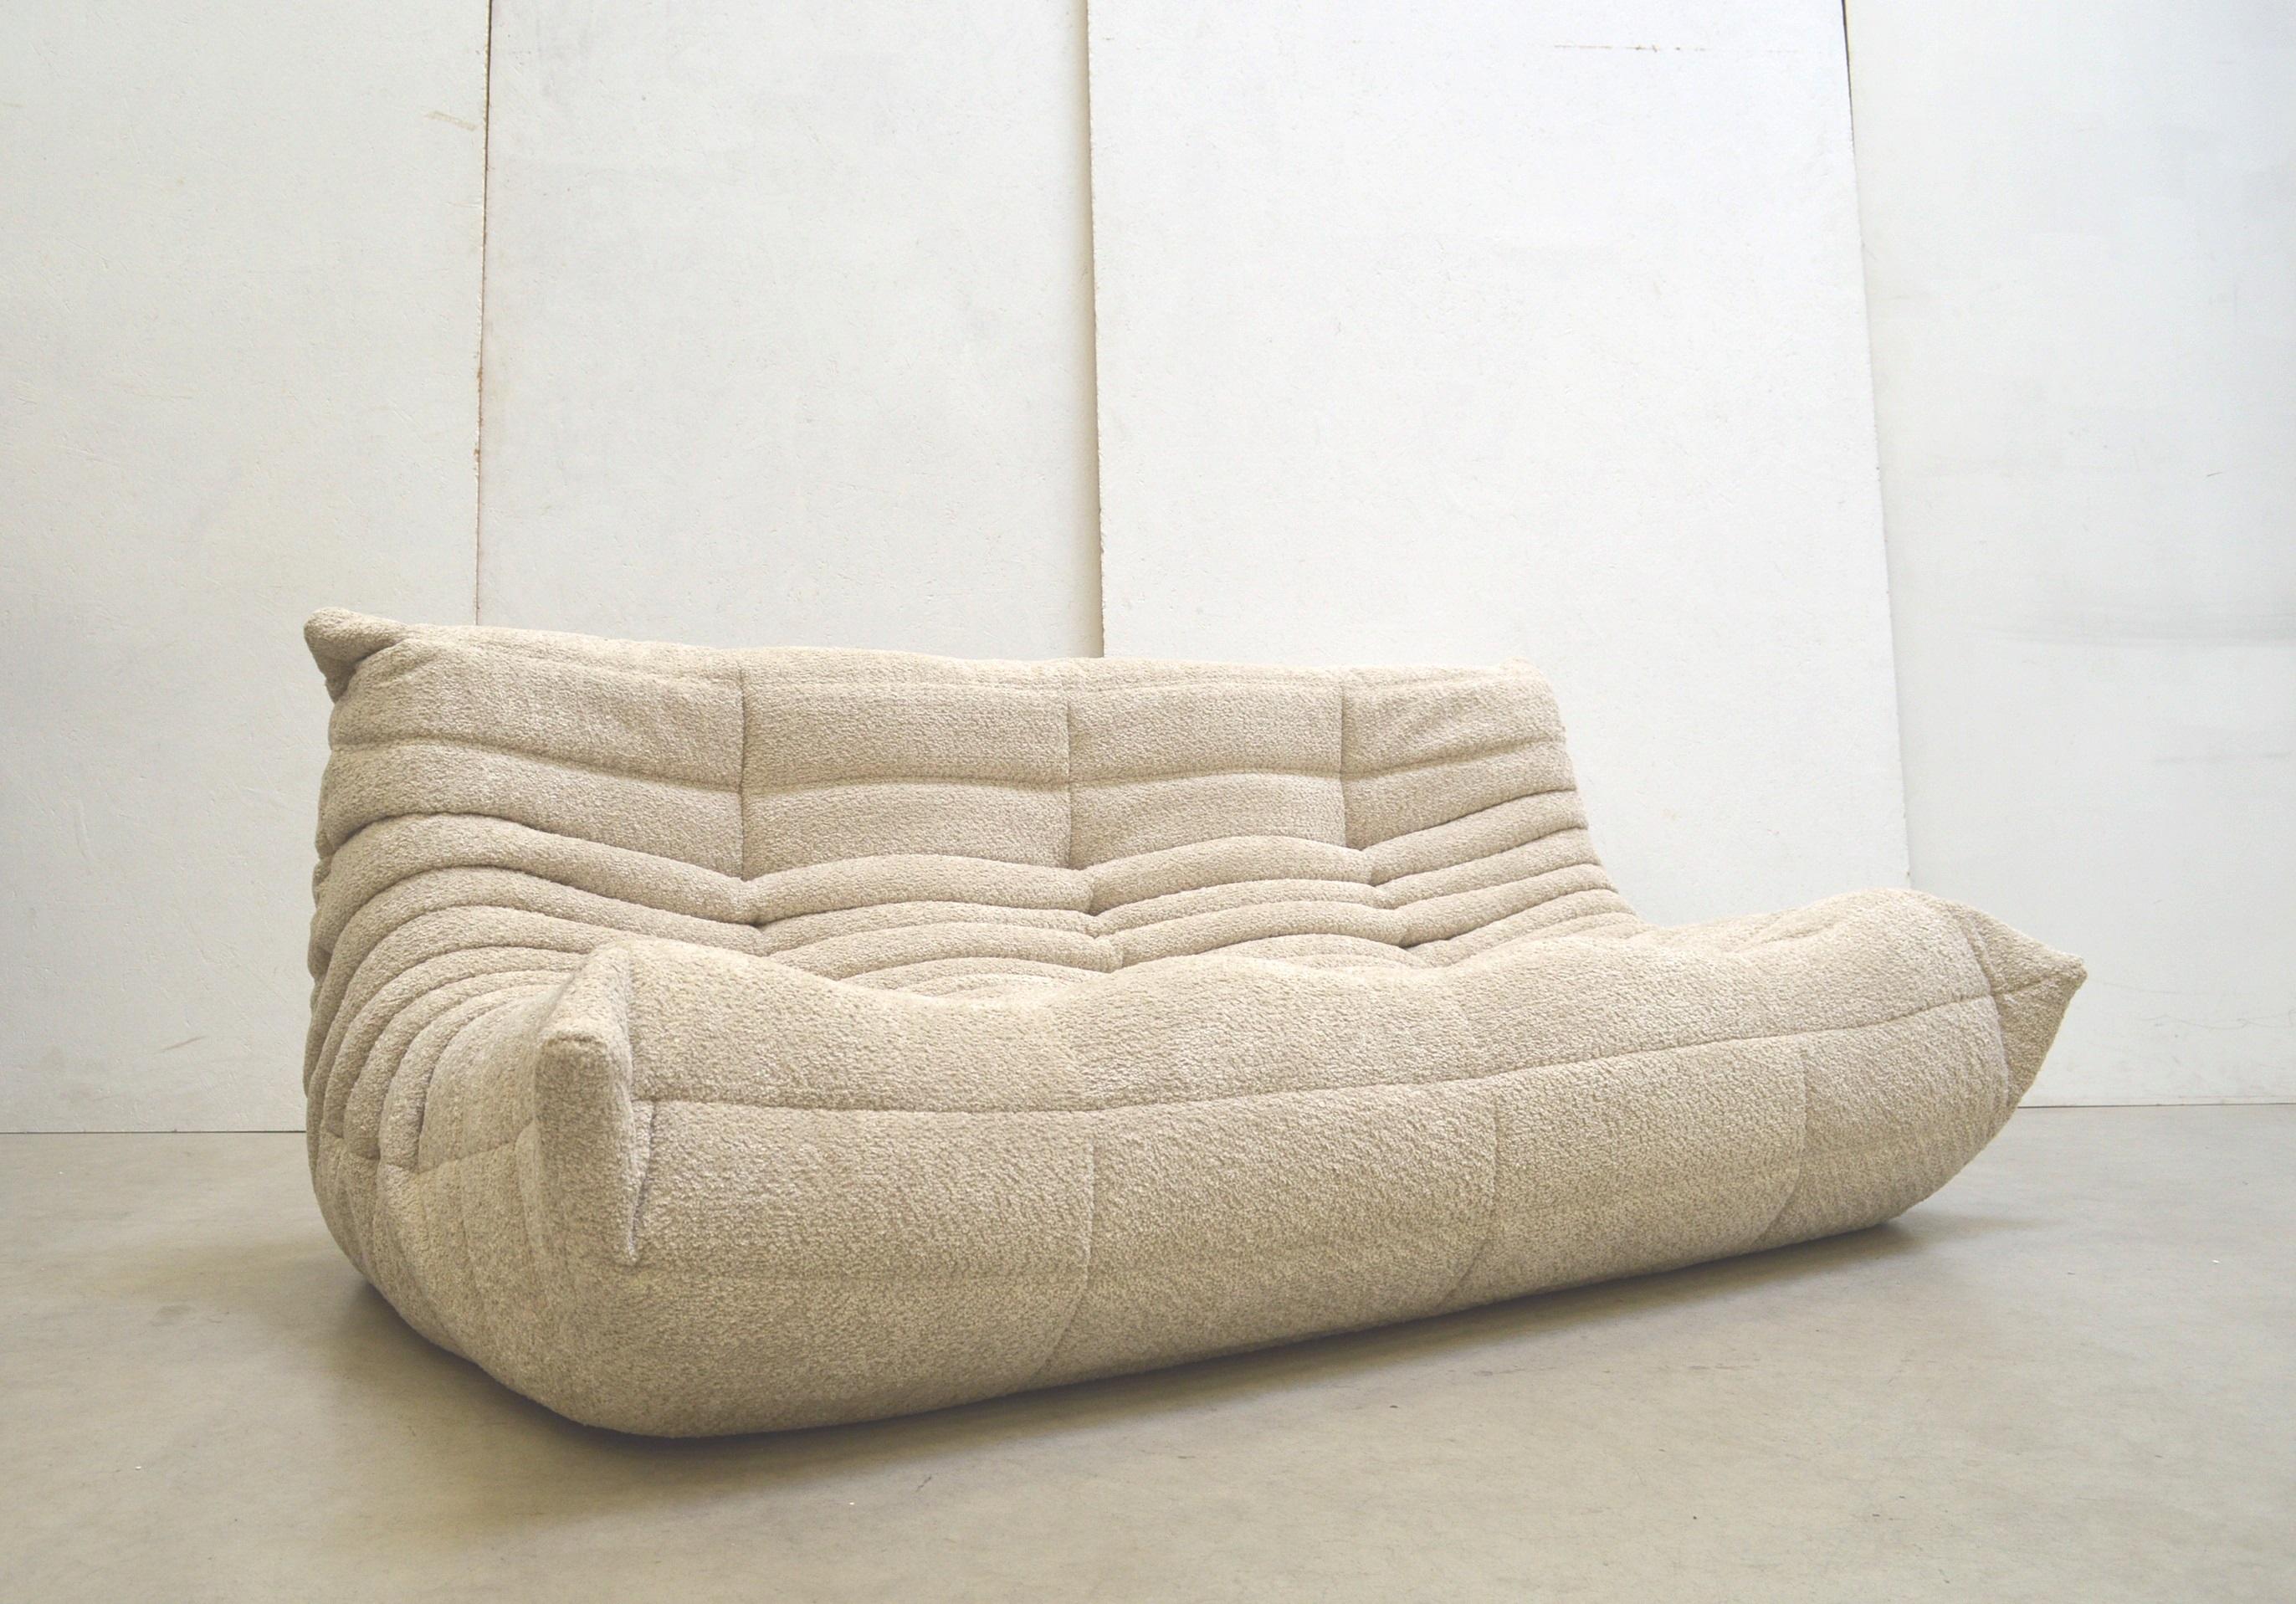 Bouclé Edition Togo Seating Group Sofa by Michel Ducaroy for Ligne Roset 1973 1